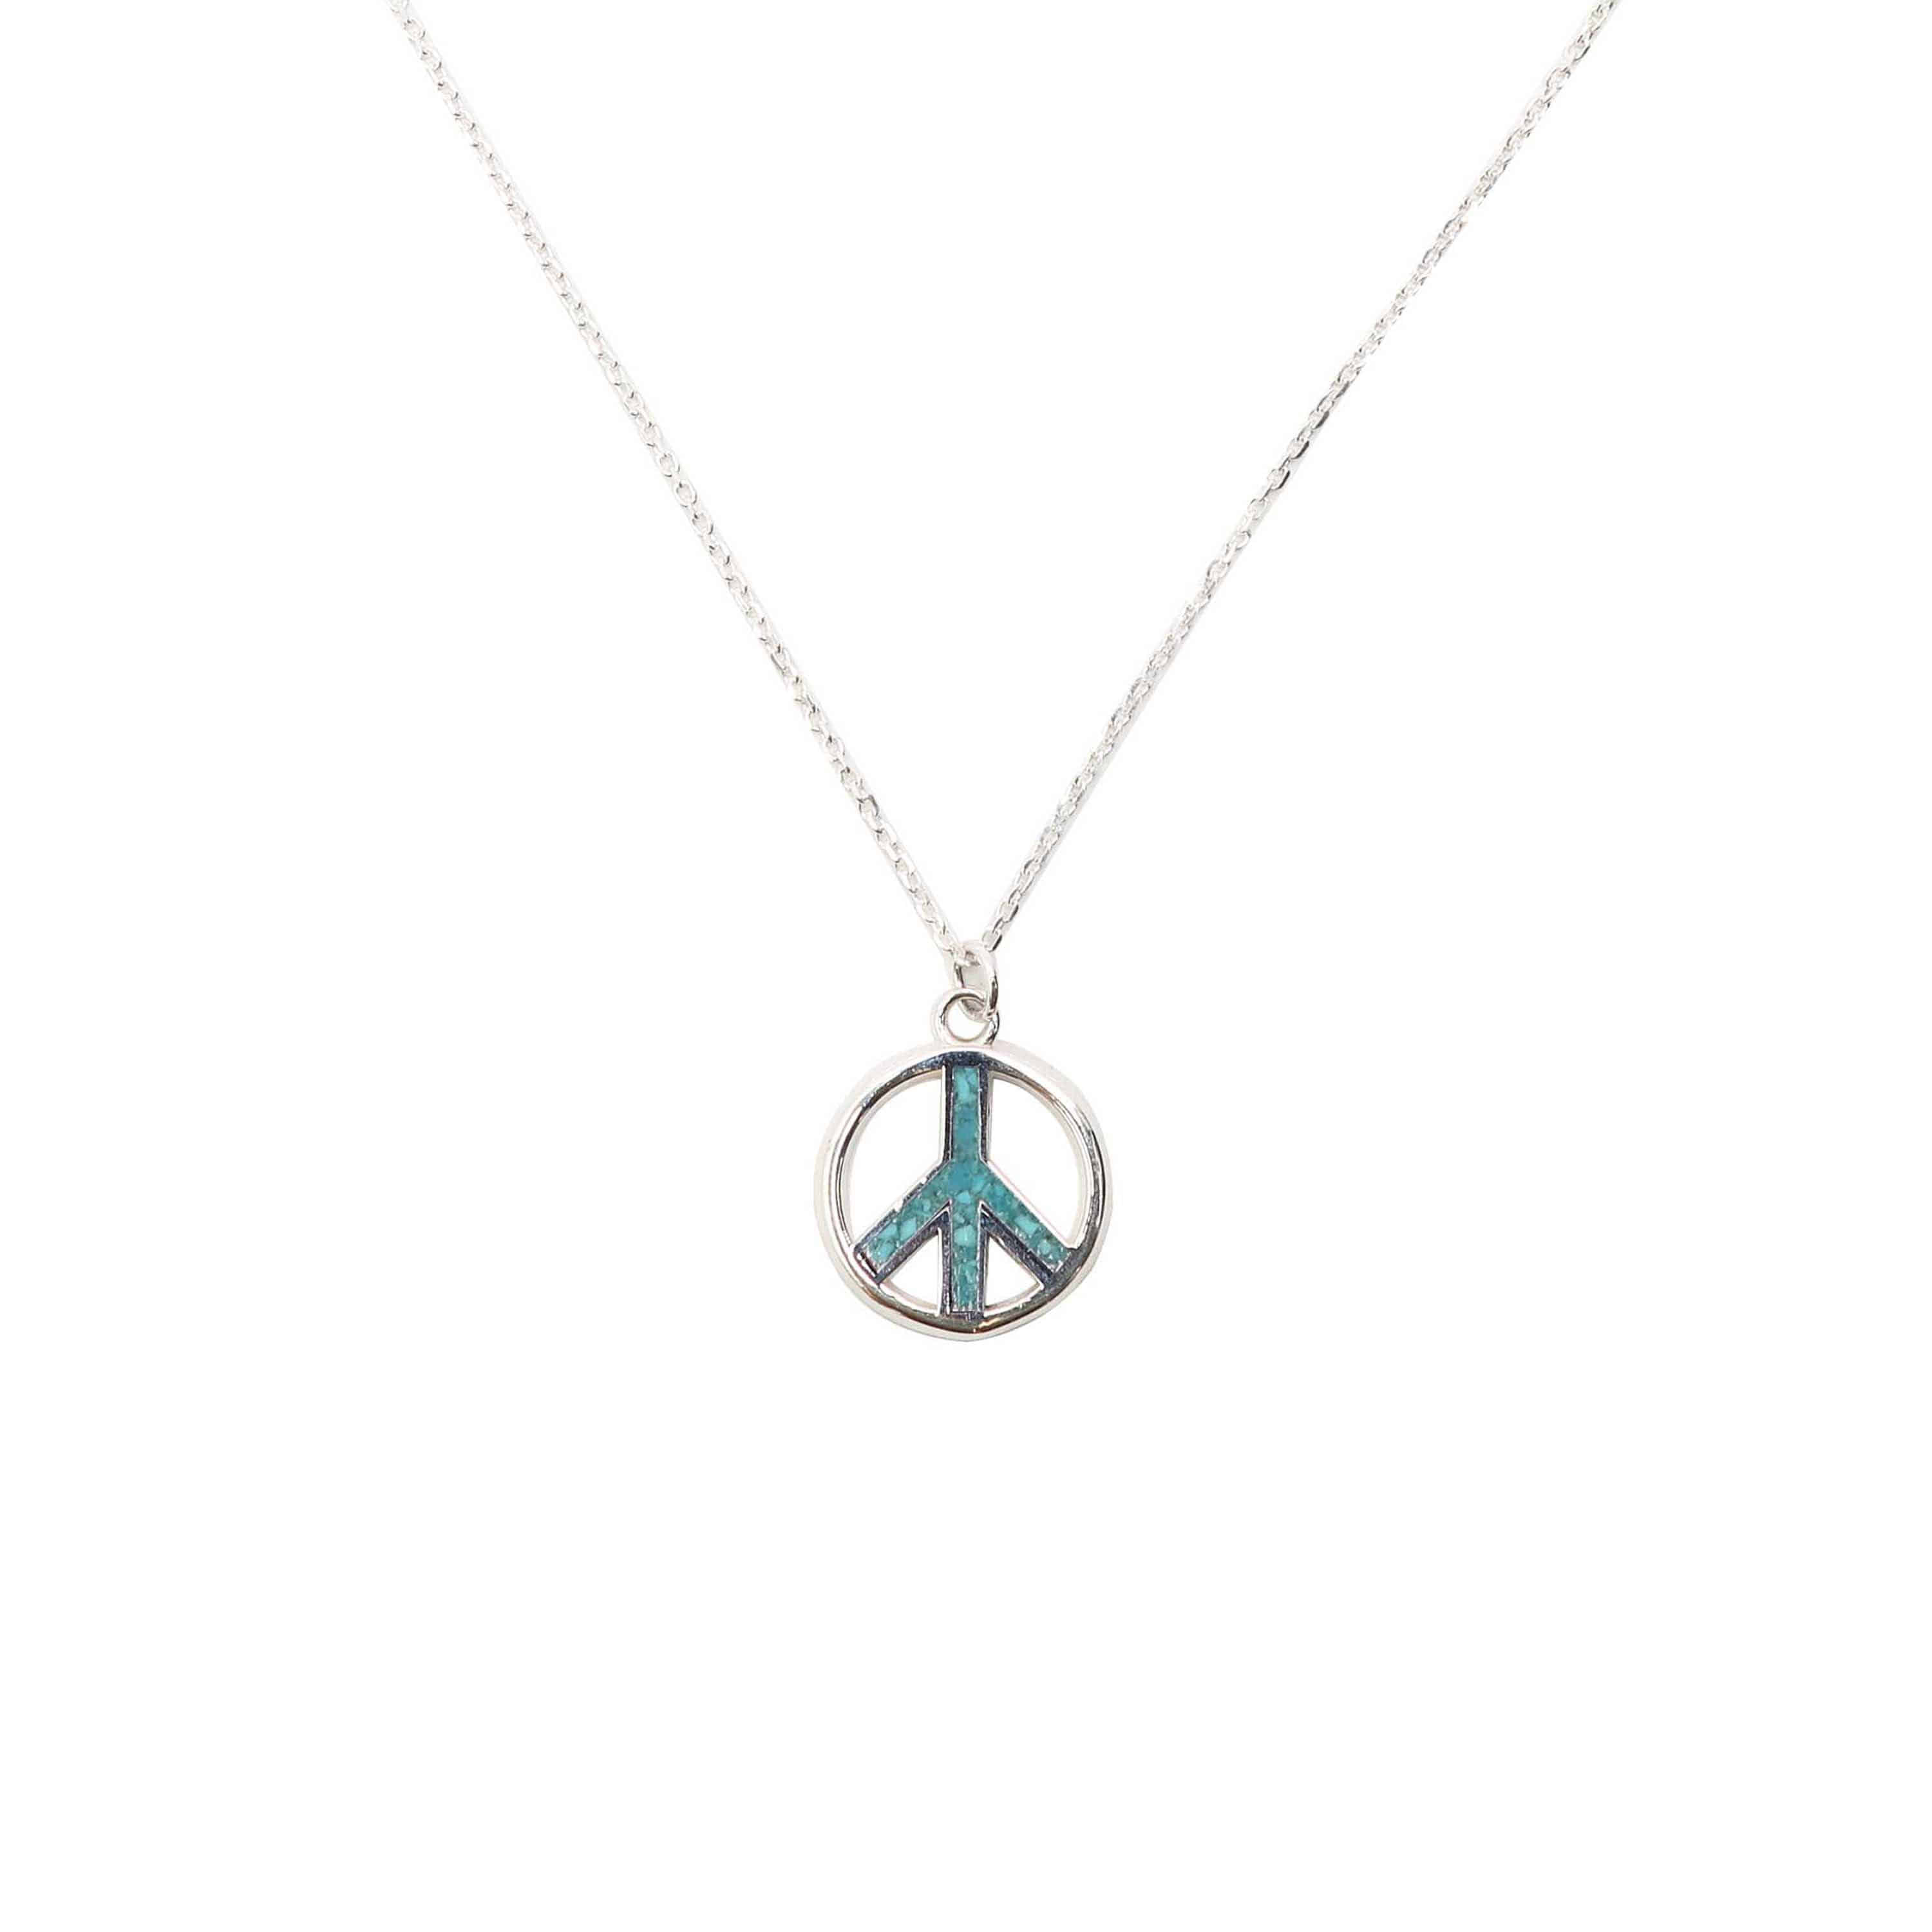 CALIFOLKS PEACE INLAY NECKLACE - TURQUOISE